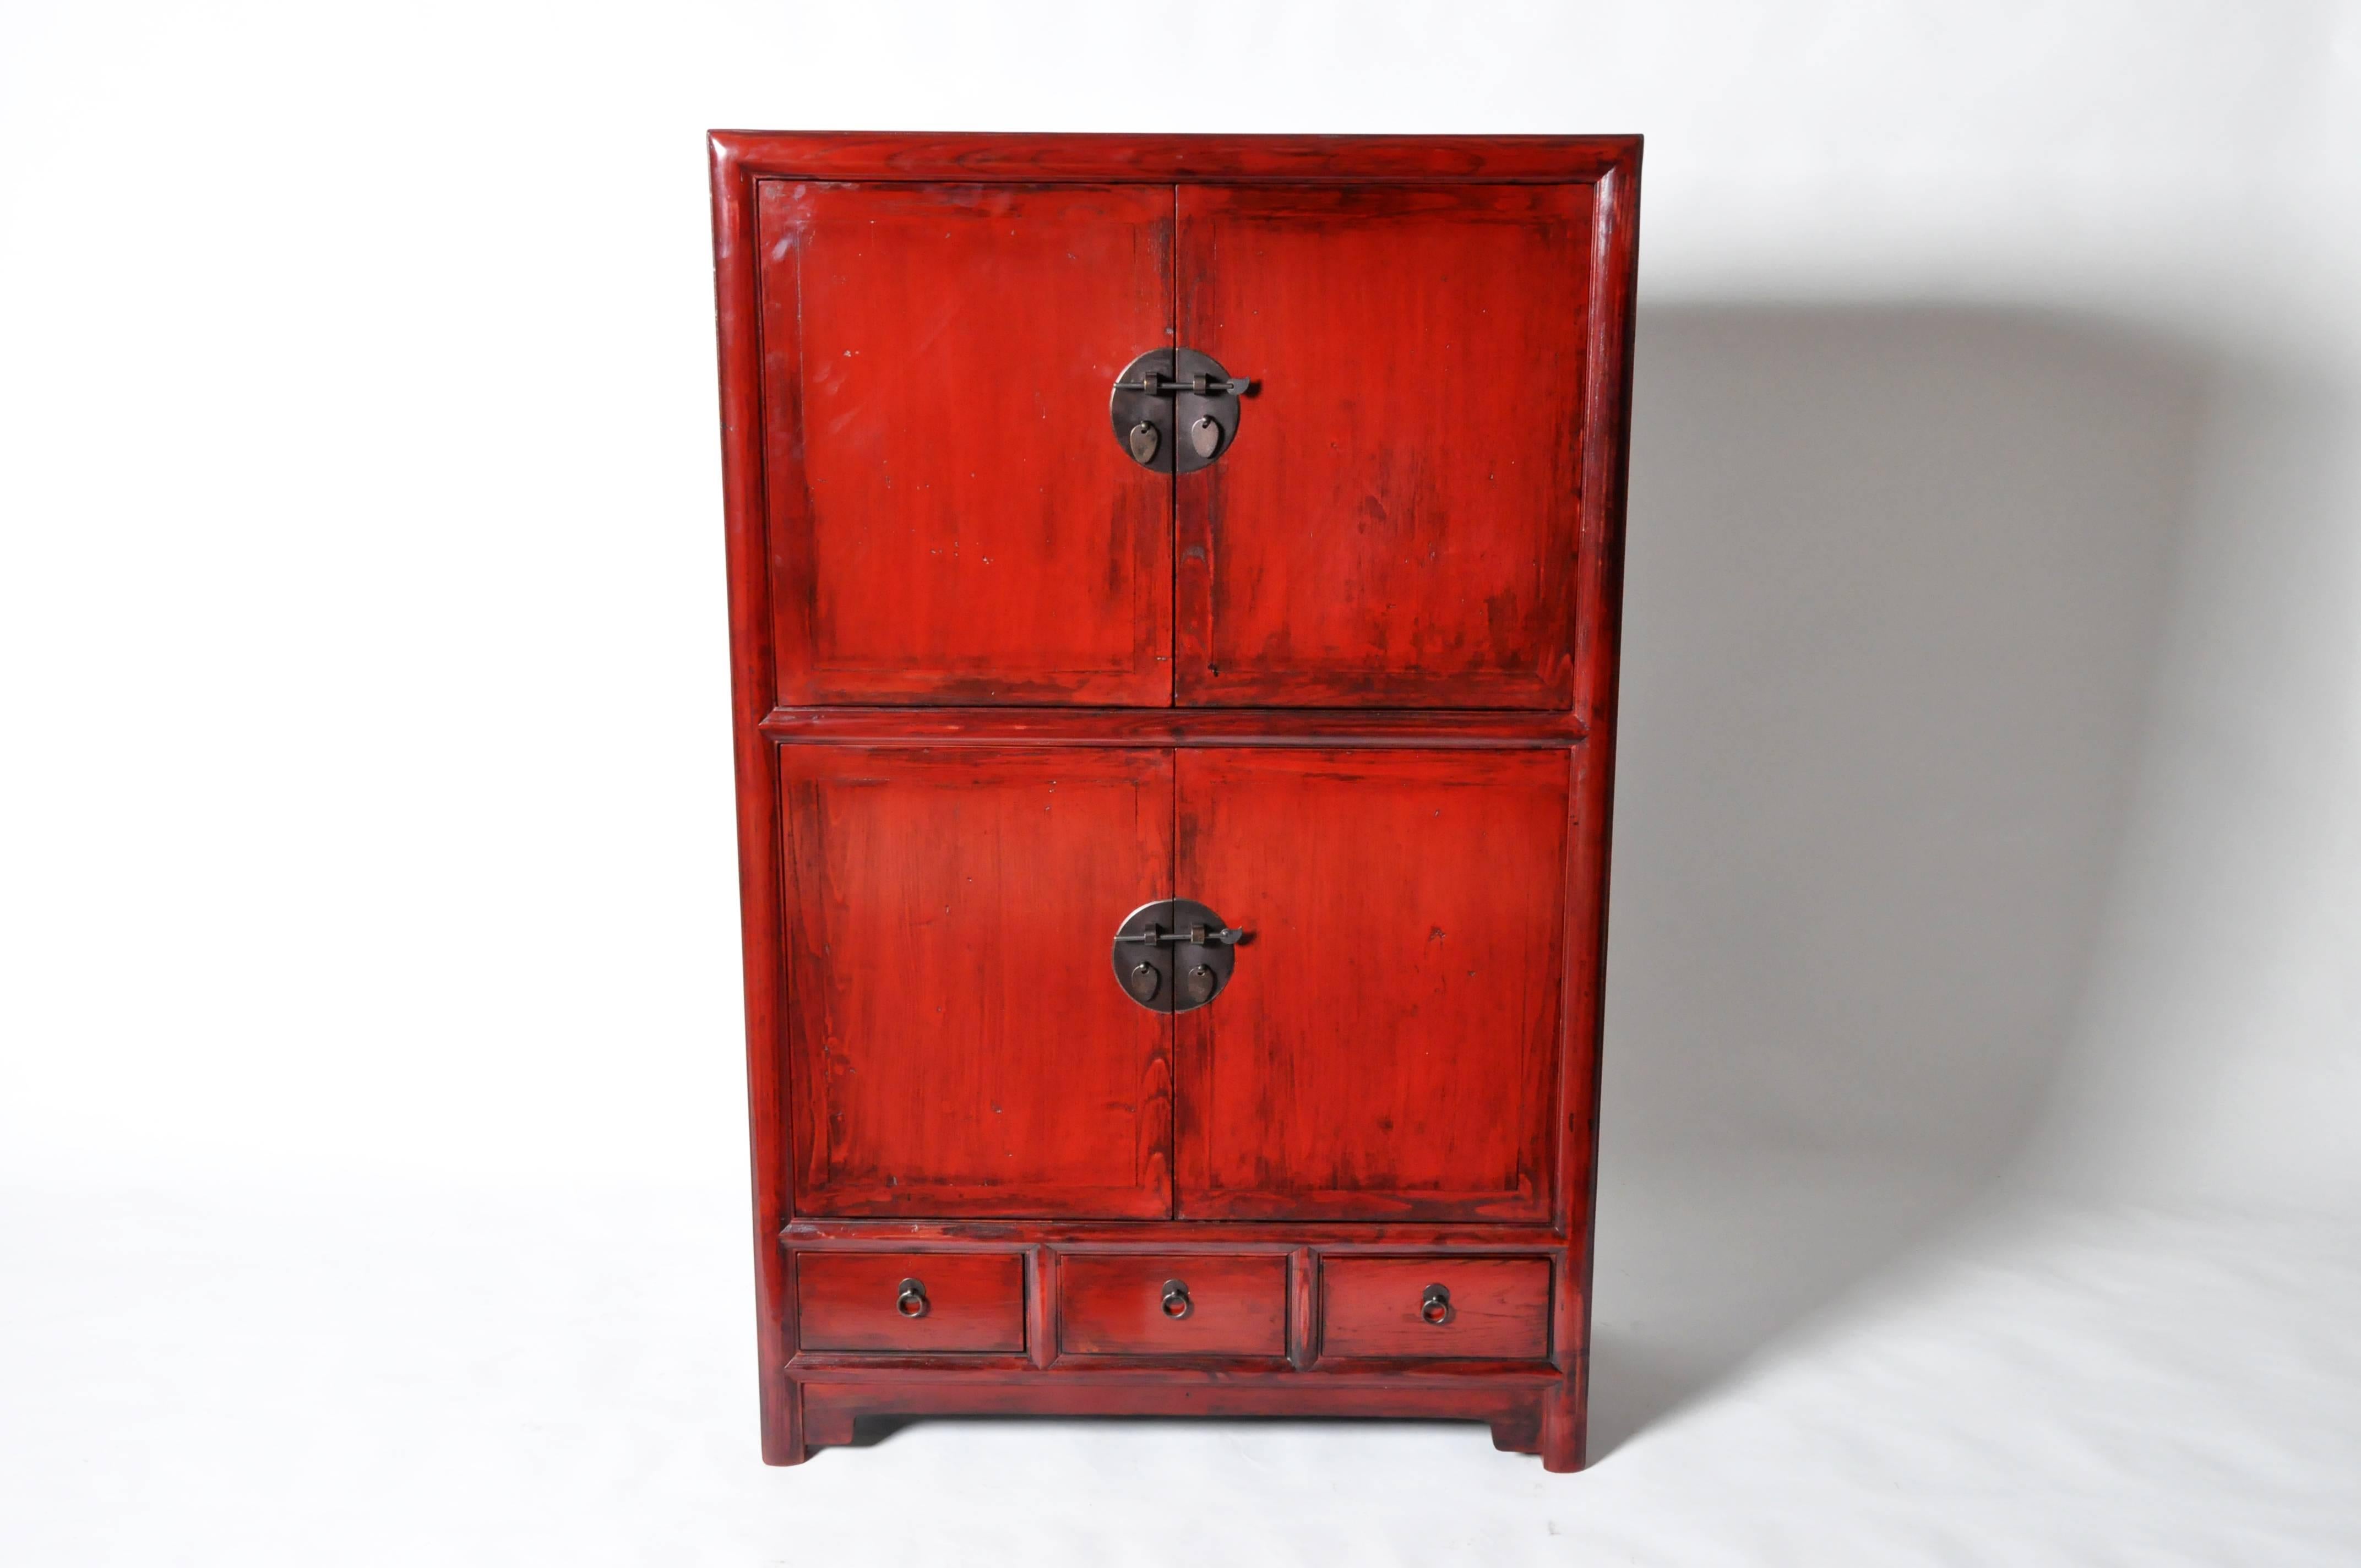 This red lacquered Chinese display cabinet is made from elmwood and has been fully restored. It features two shelves and three drawers for ample storage.